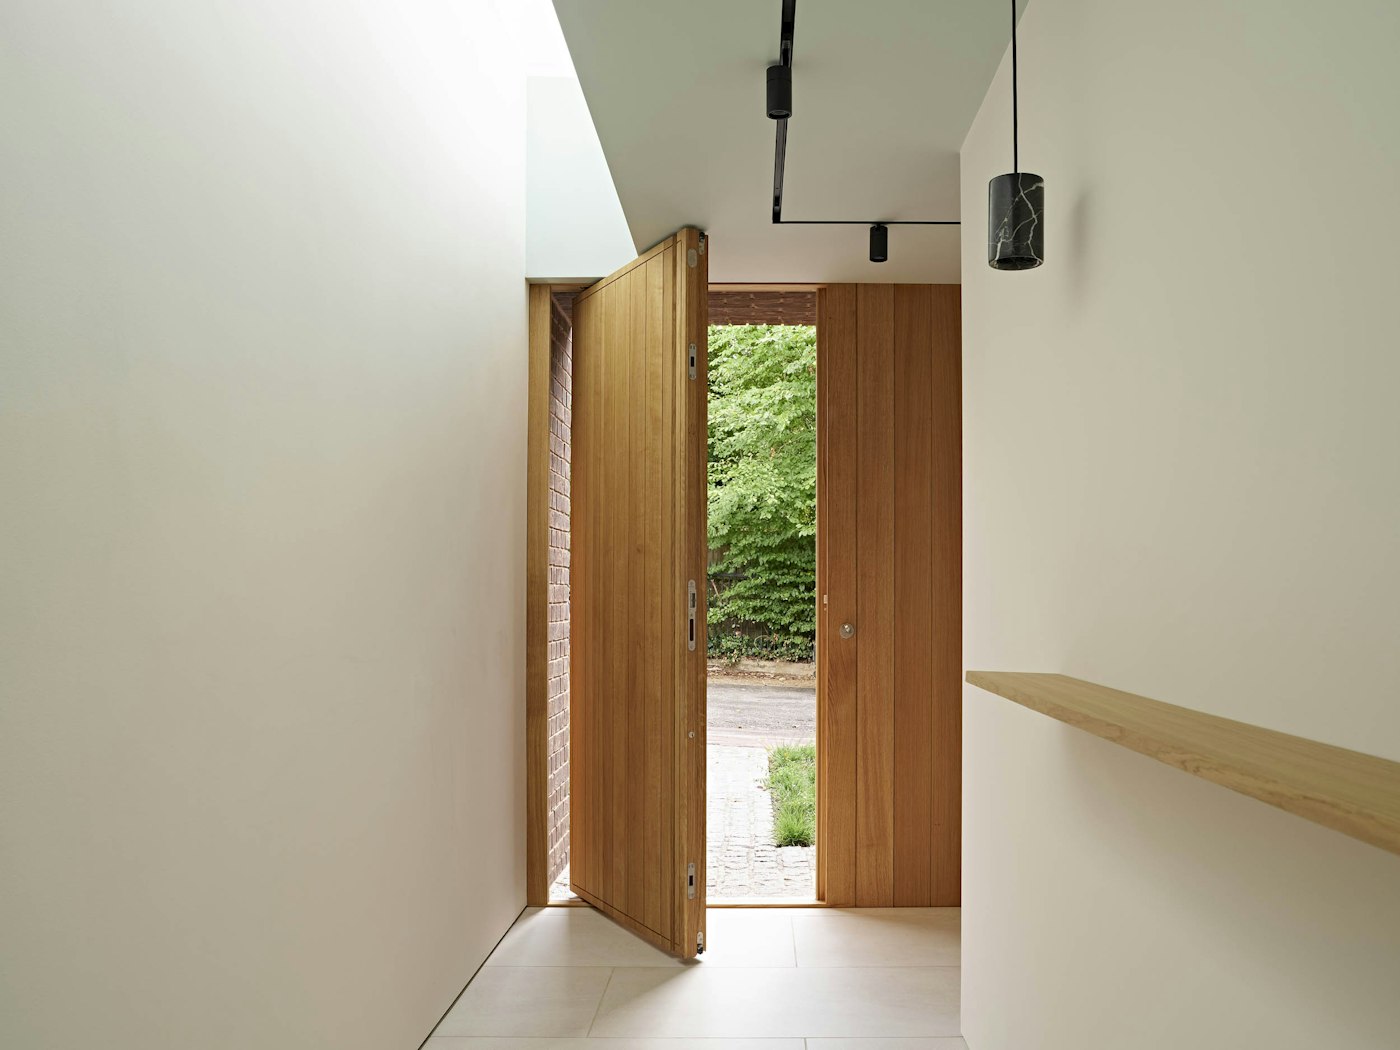 The Porto in oak was chosen with a pivot front door opening for a contemporary feel